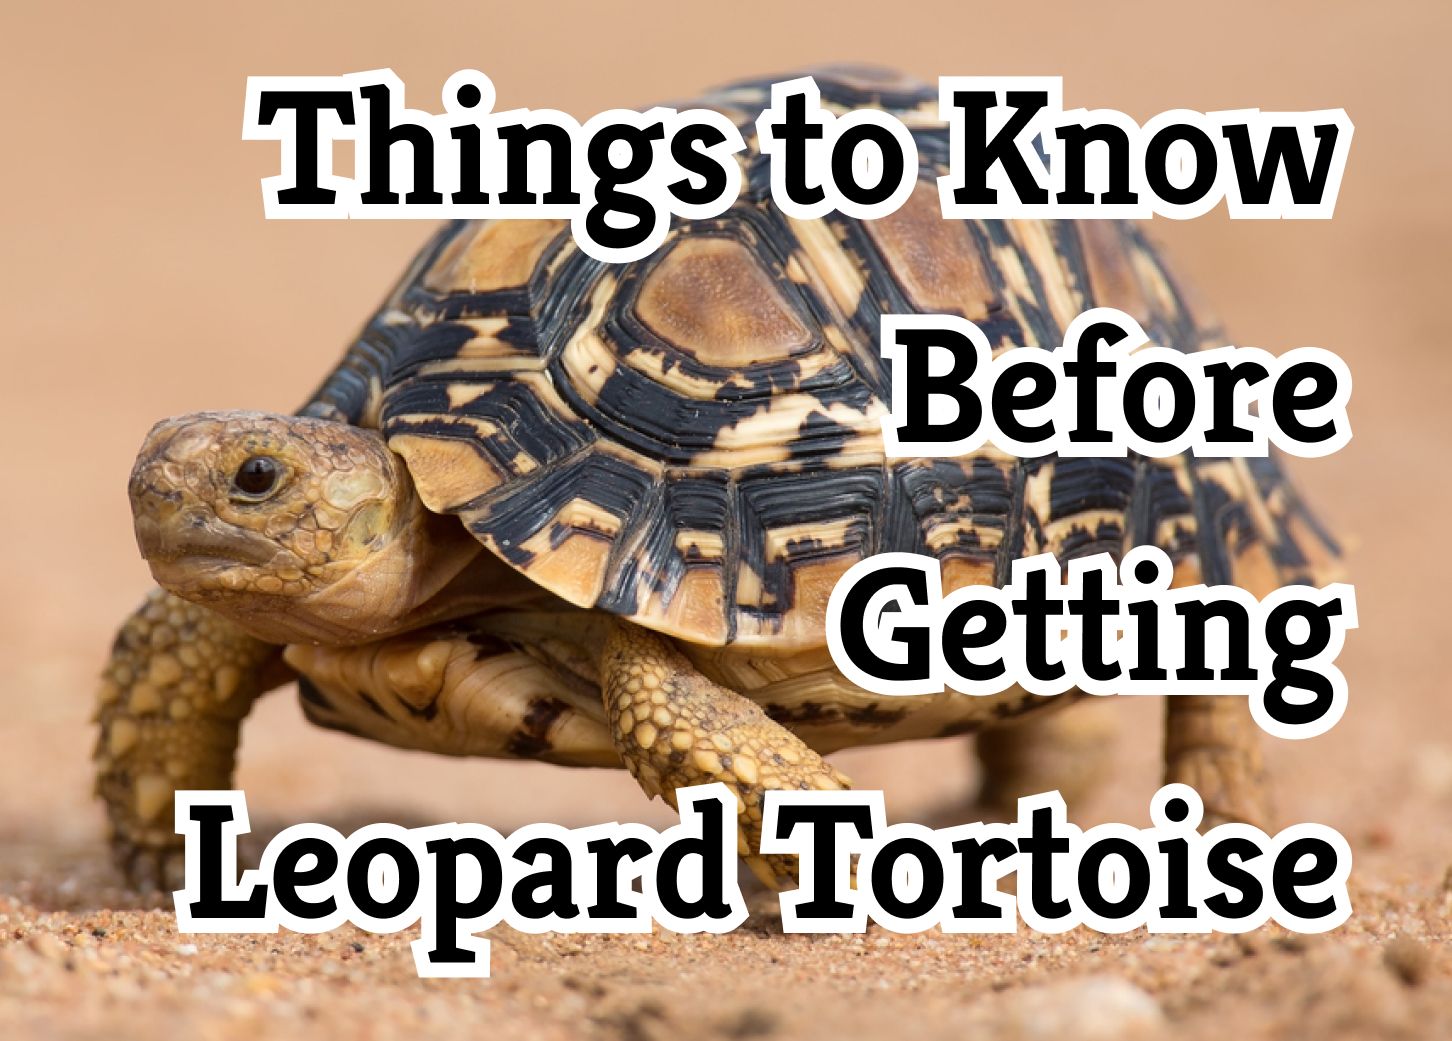 30 Crucial Things to Know About the Leopard Tortoise